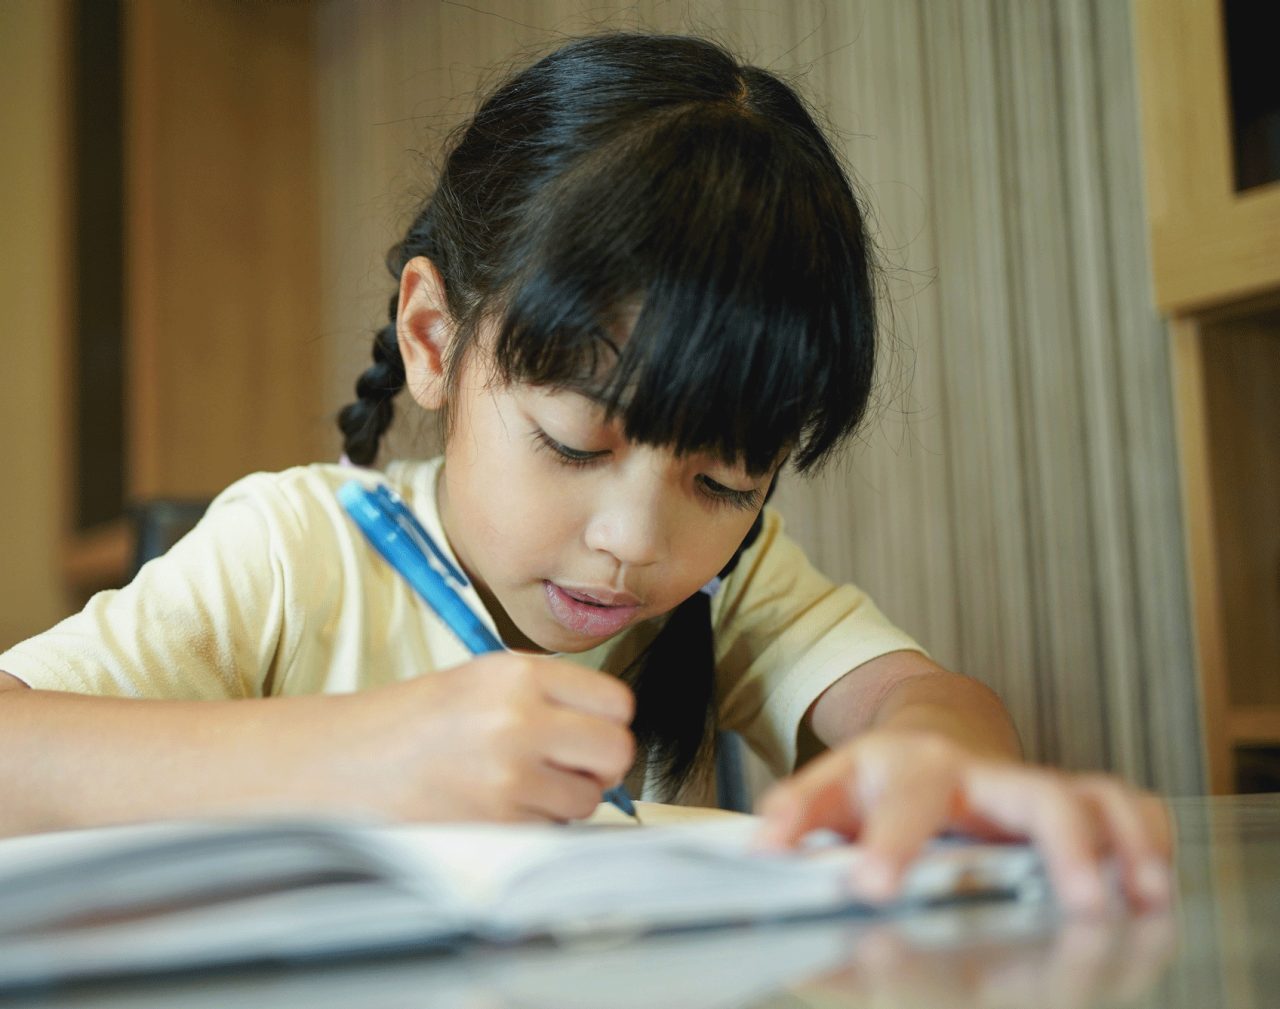 Encourage Your Child to Take Notes by Hand